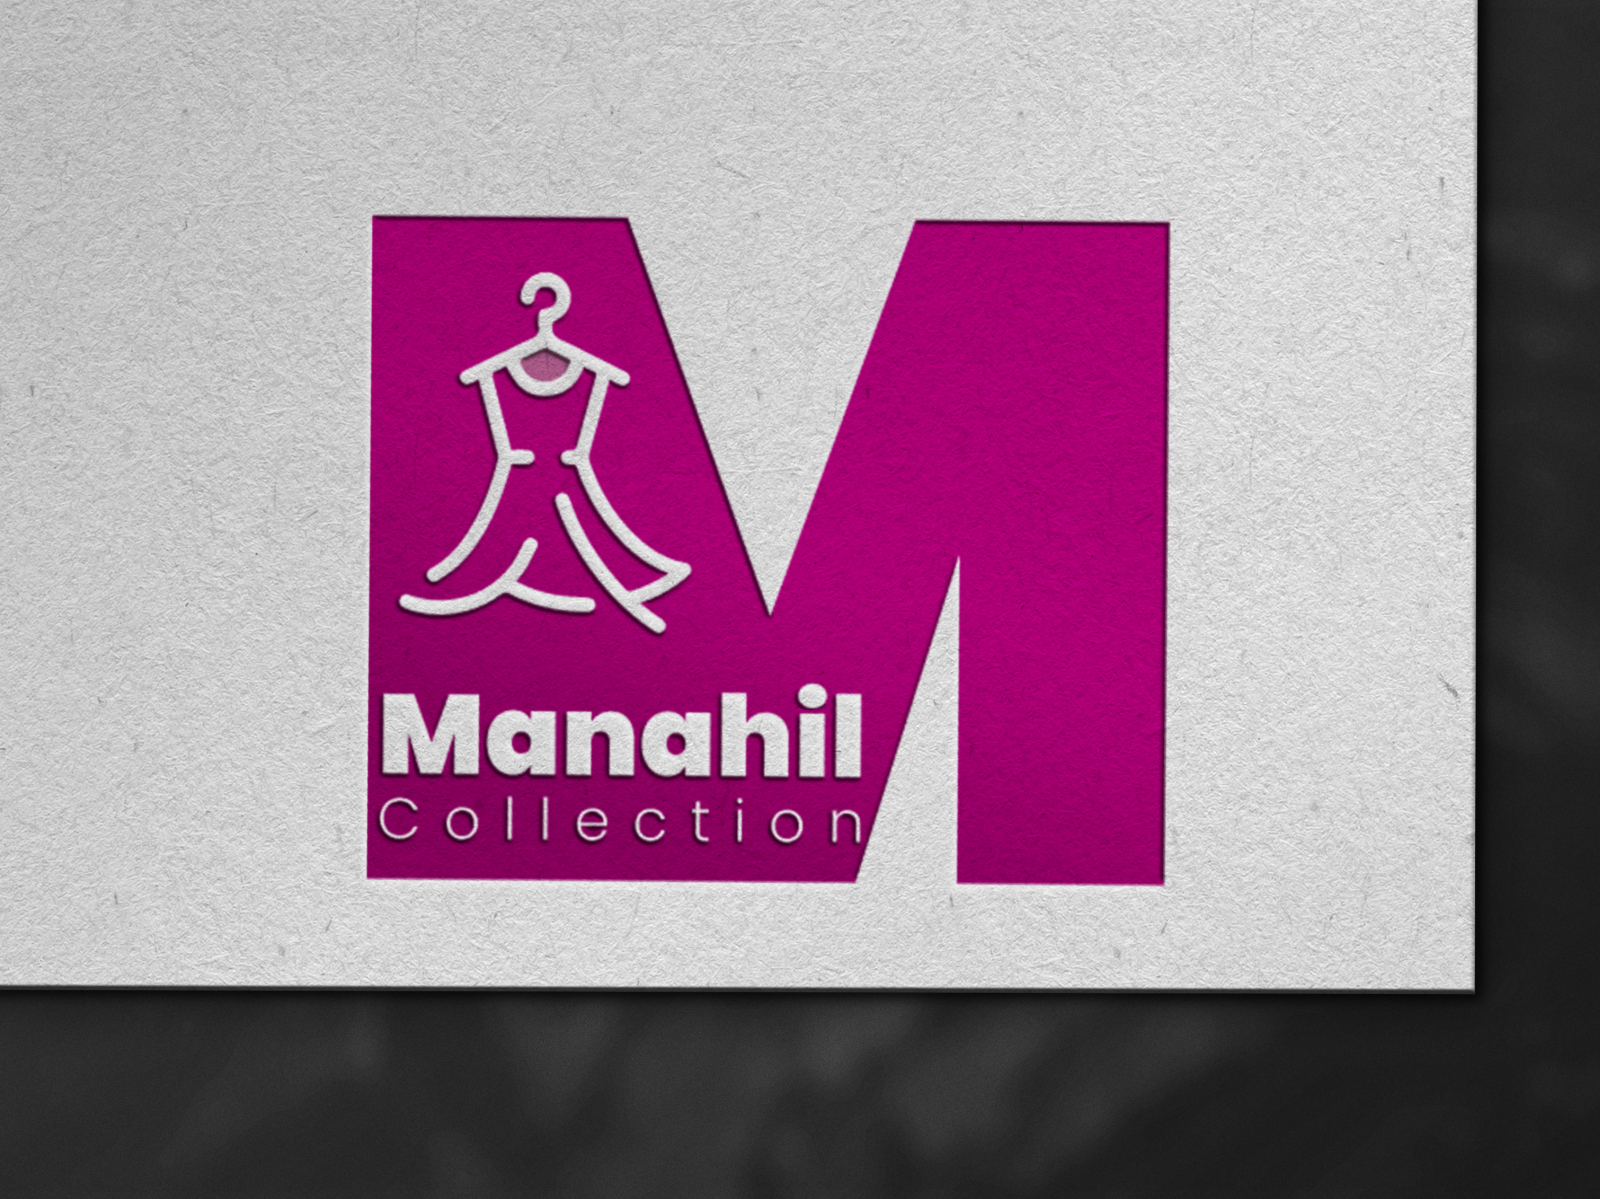 Logo Design by Mansoor alam on Dribbble